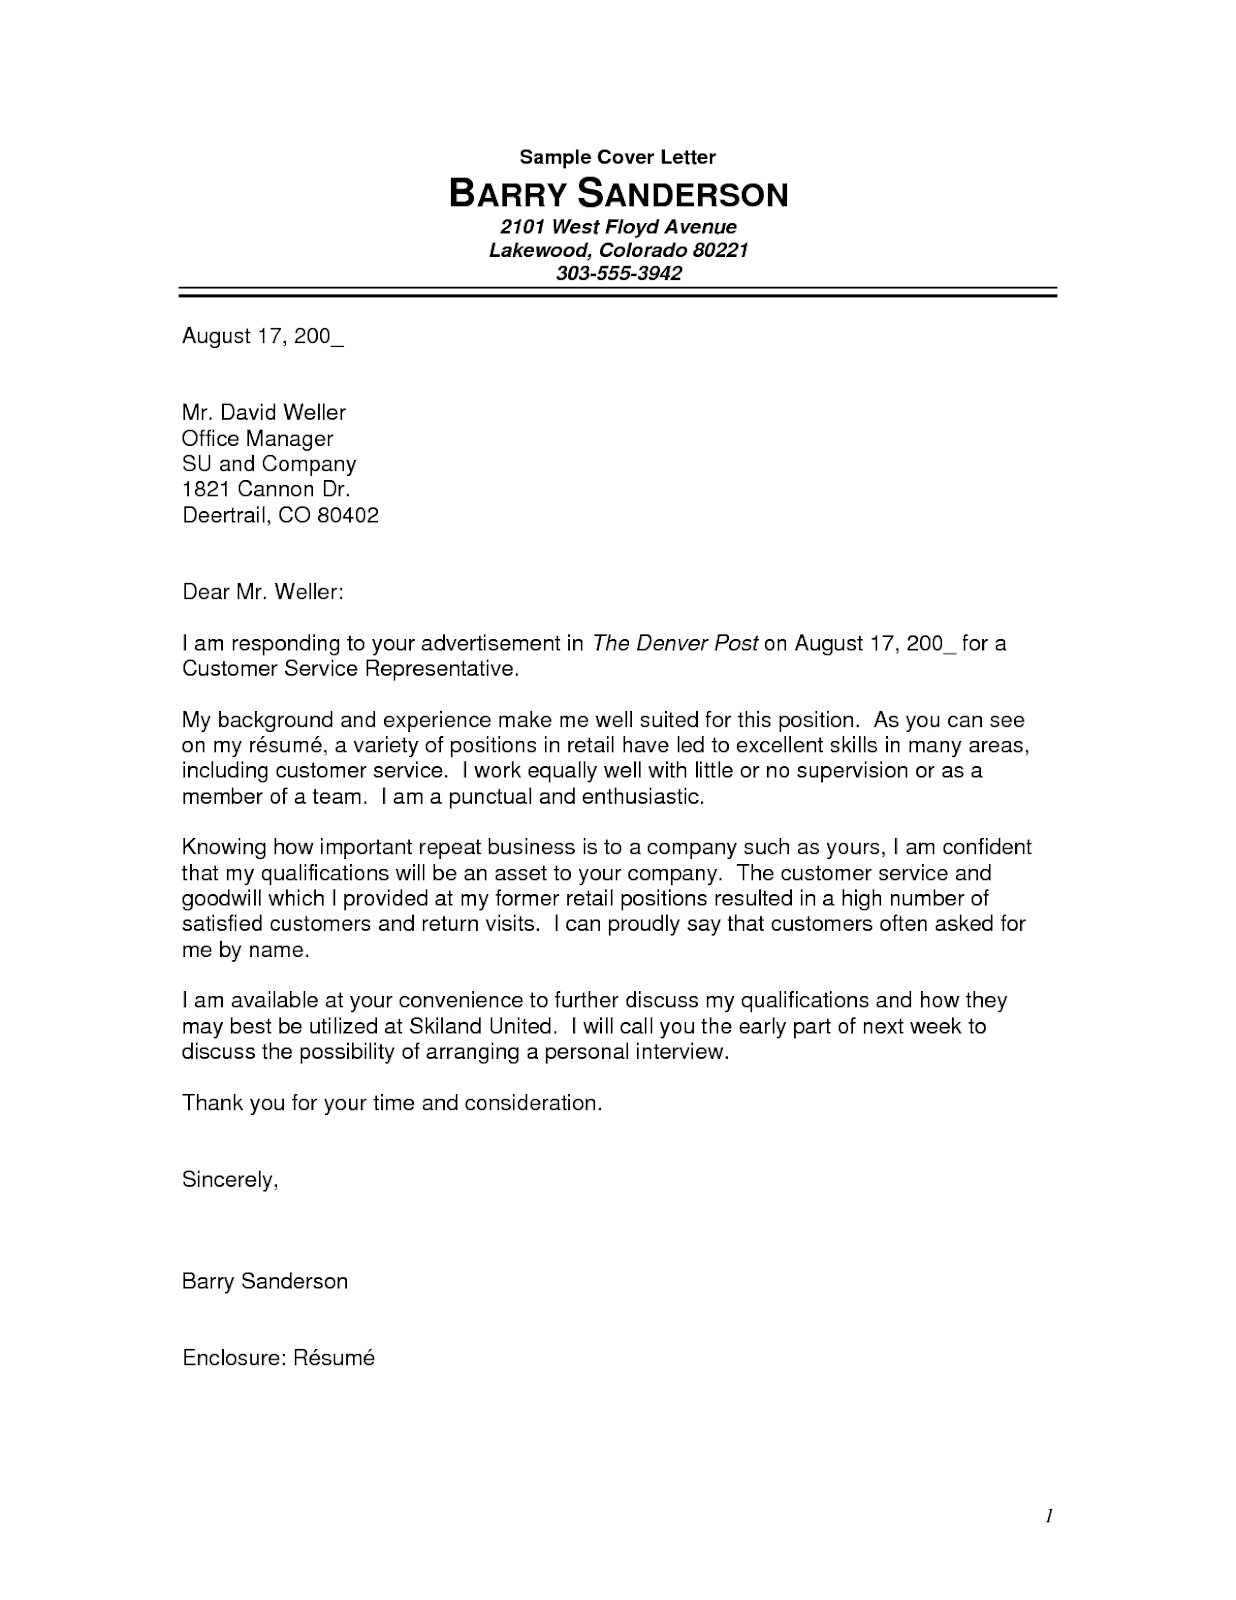 student cover letter examples no experience